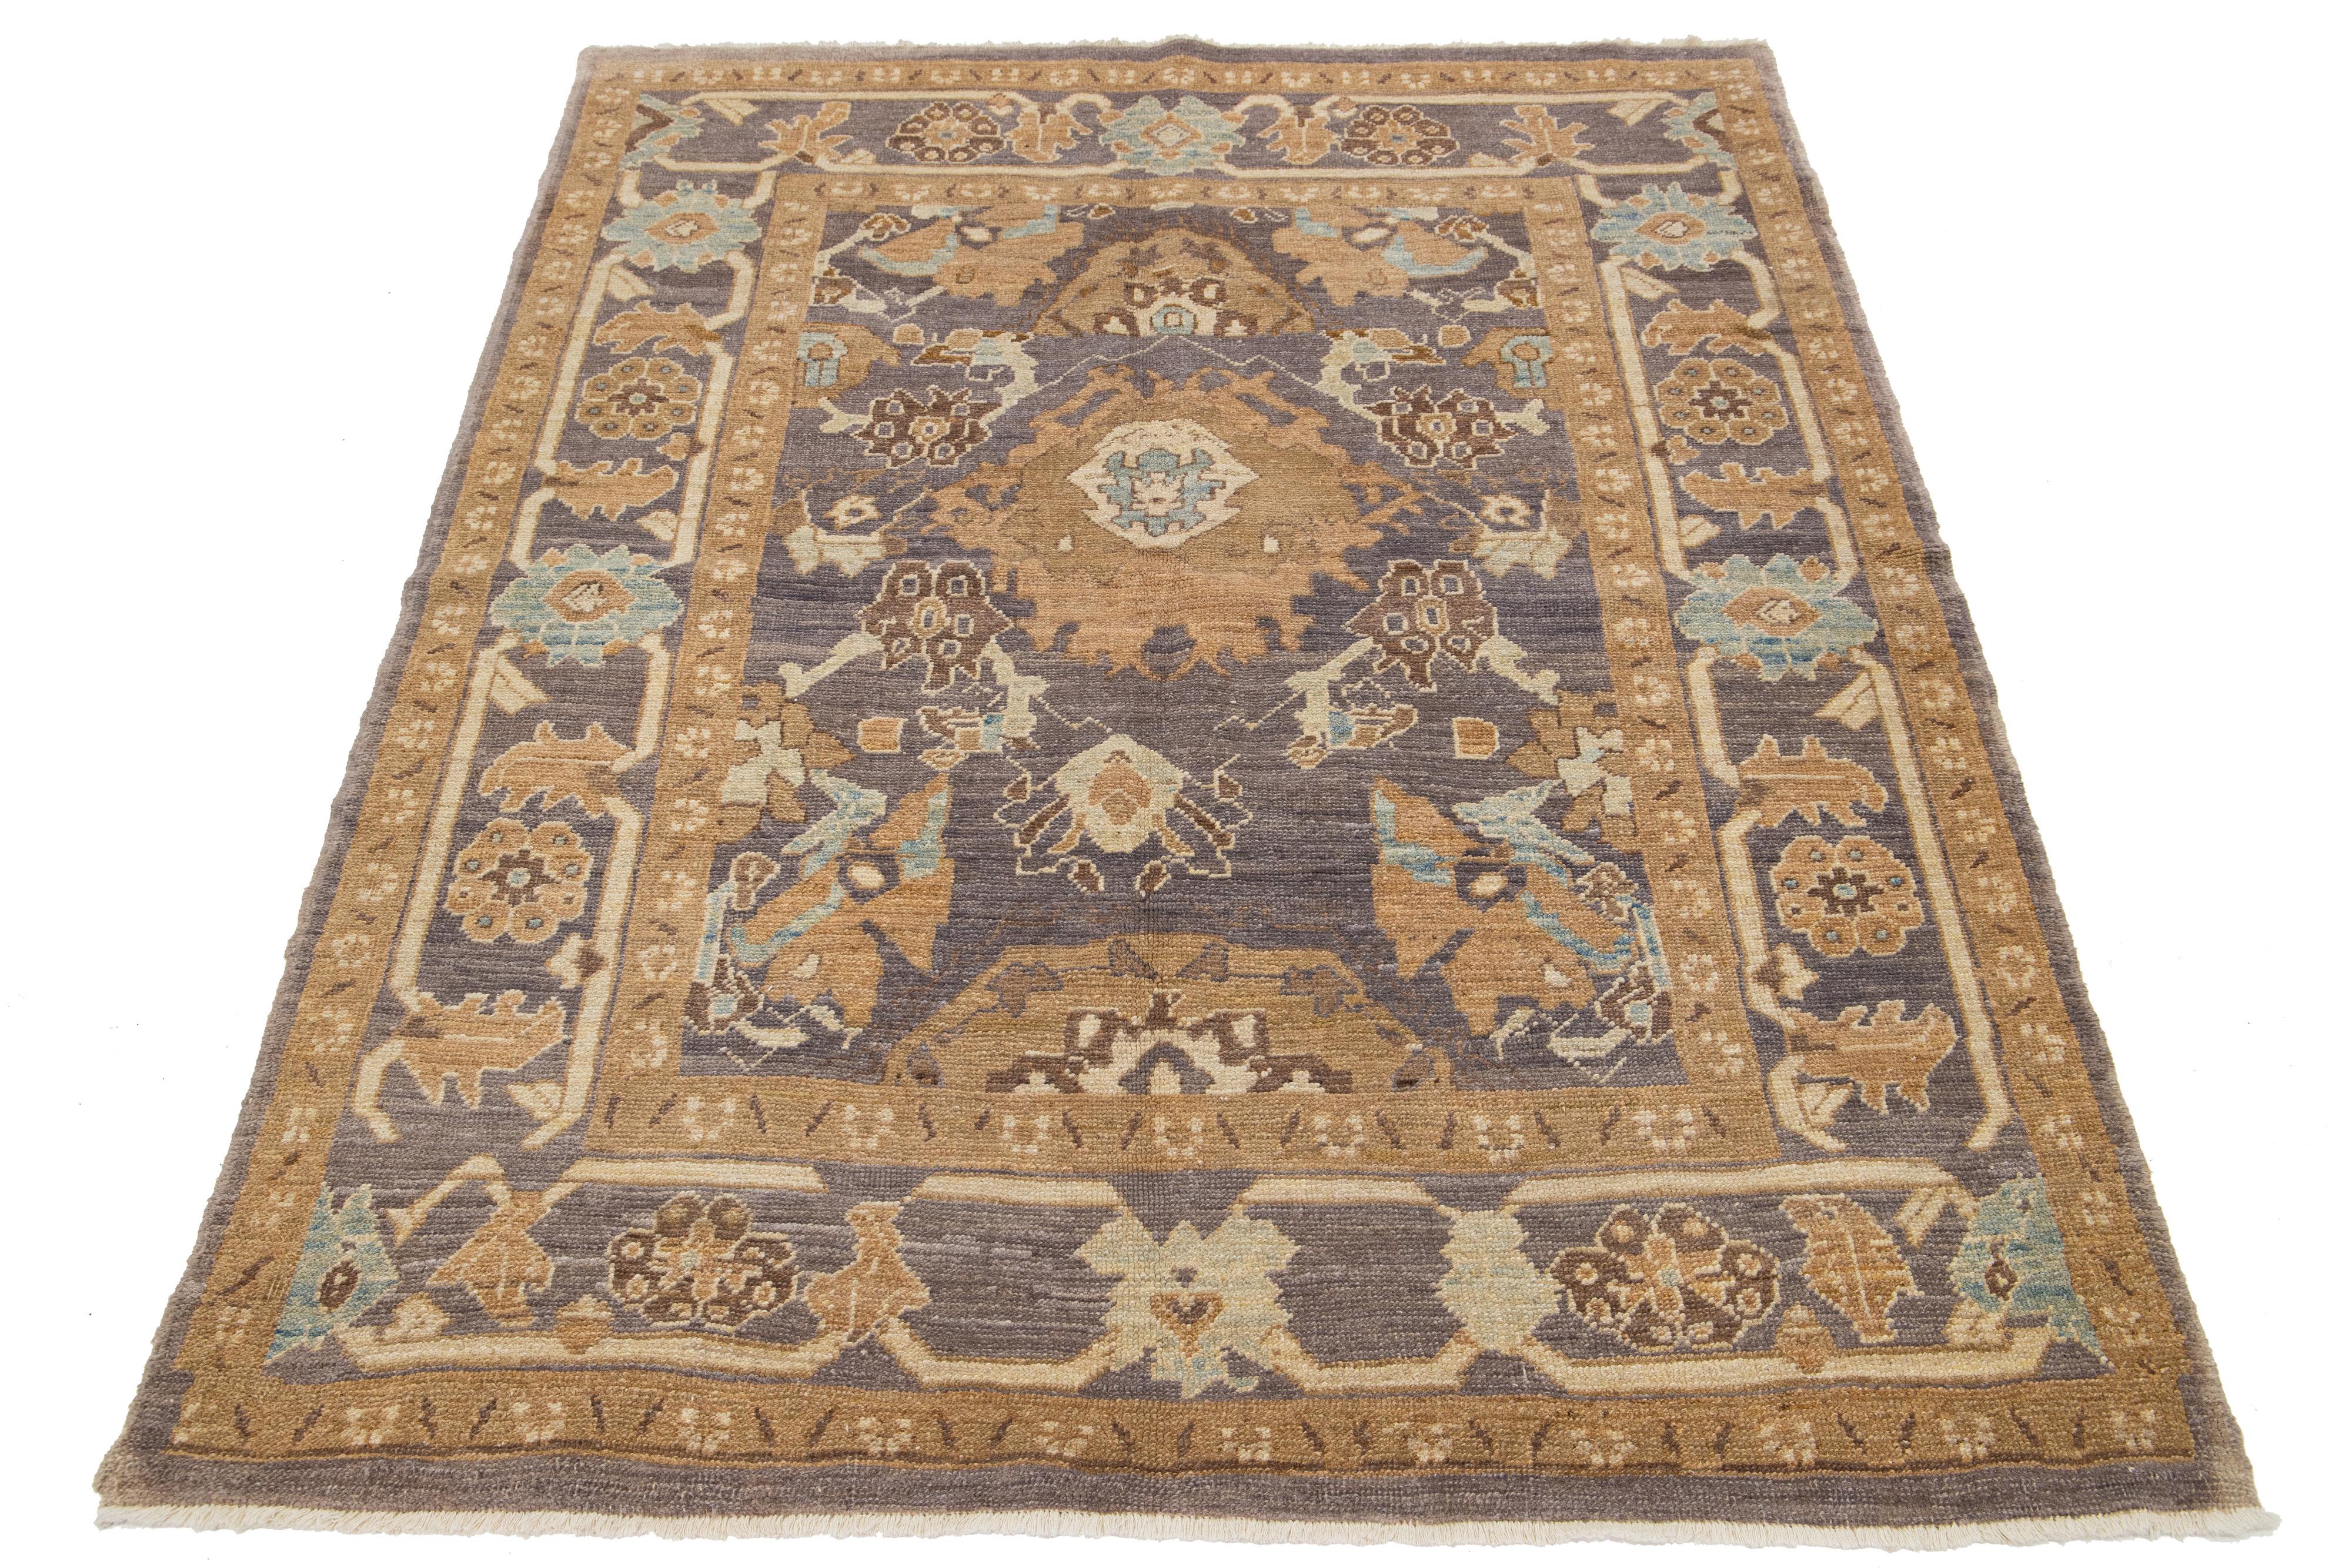 A hand-knotted wool rug with a blue and light brown design on a gray field.

This rug measures at 5'1